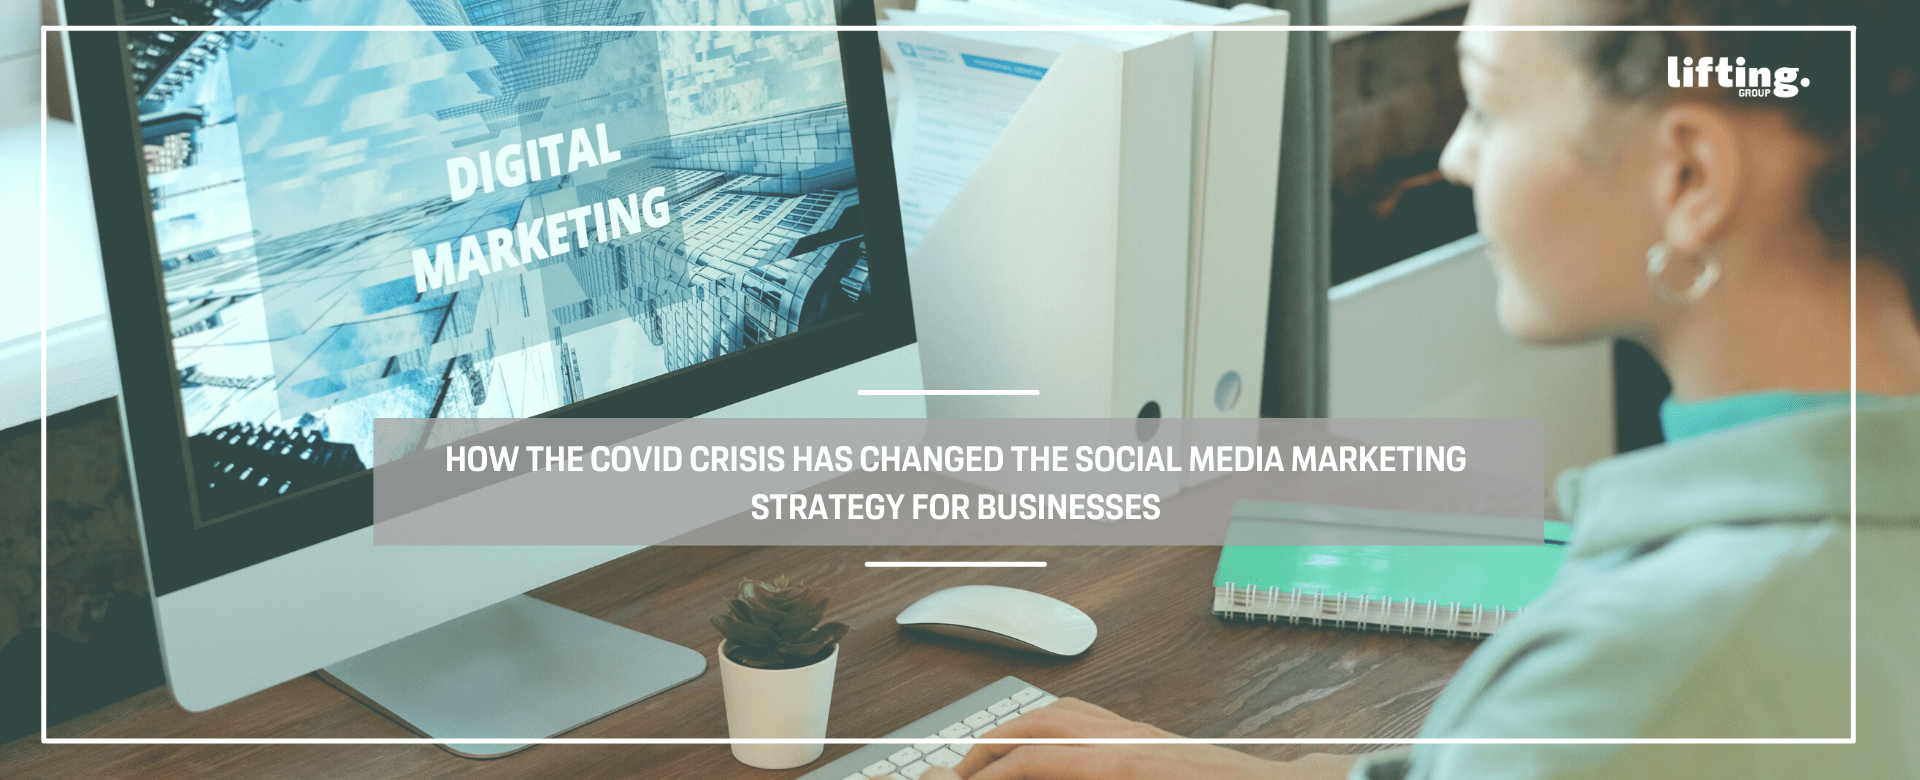 How have digital strategies changed as a result of Covid-19?